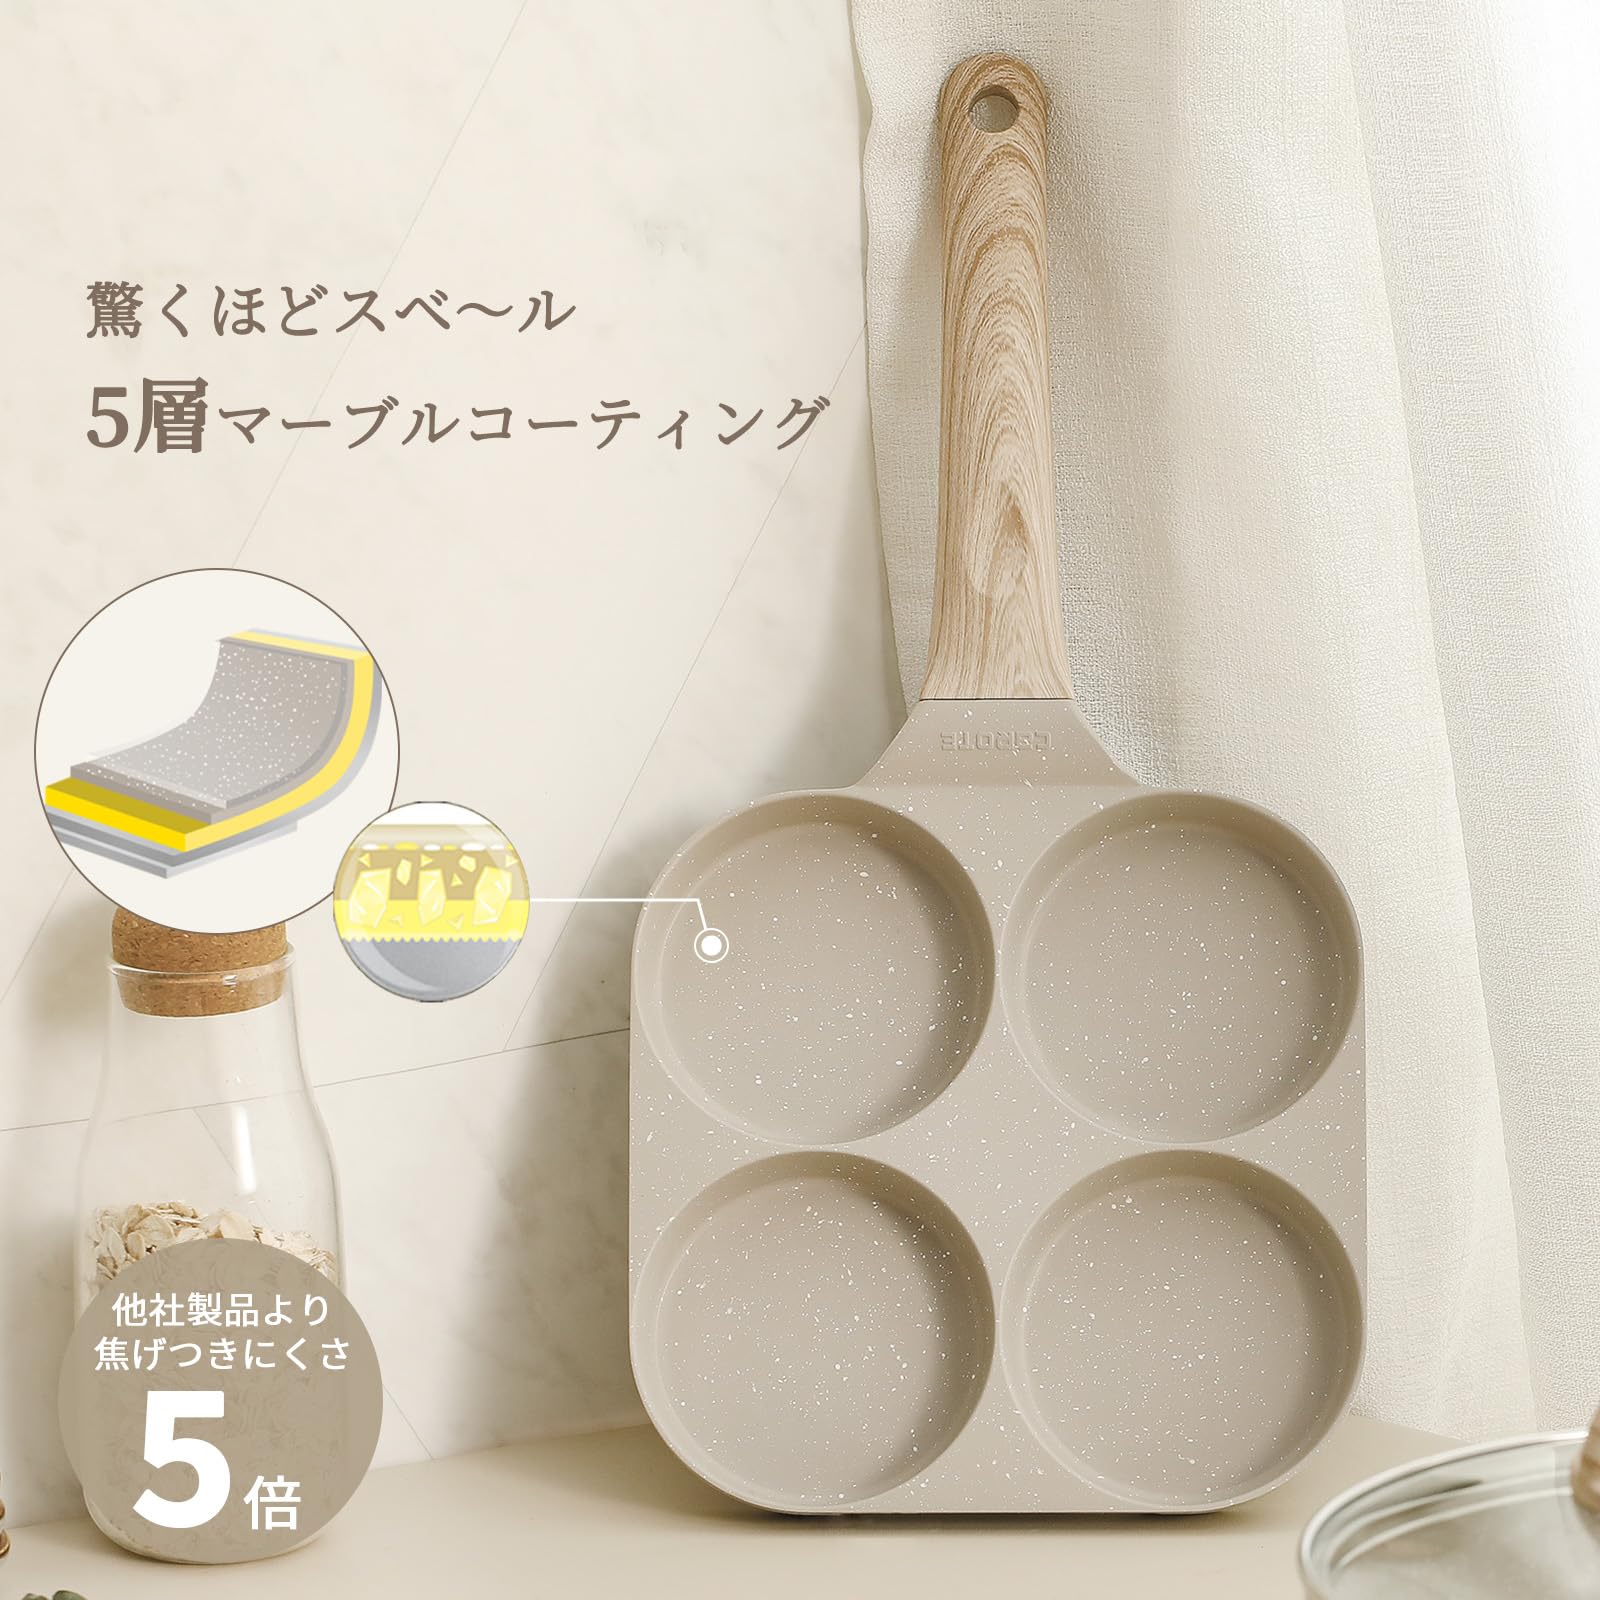 Carote CAROTE fried egg frying pan partition frying pan